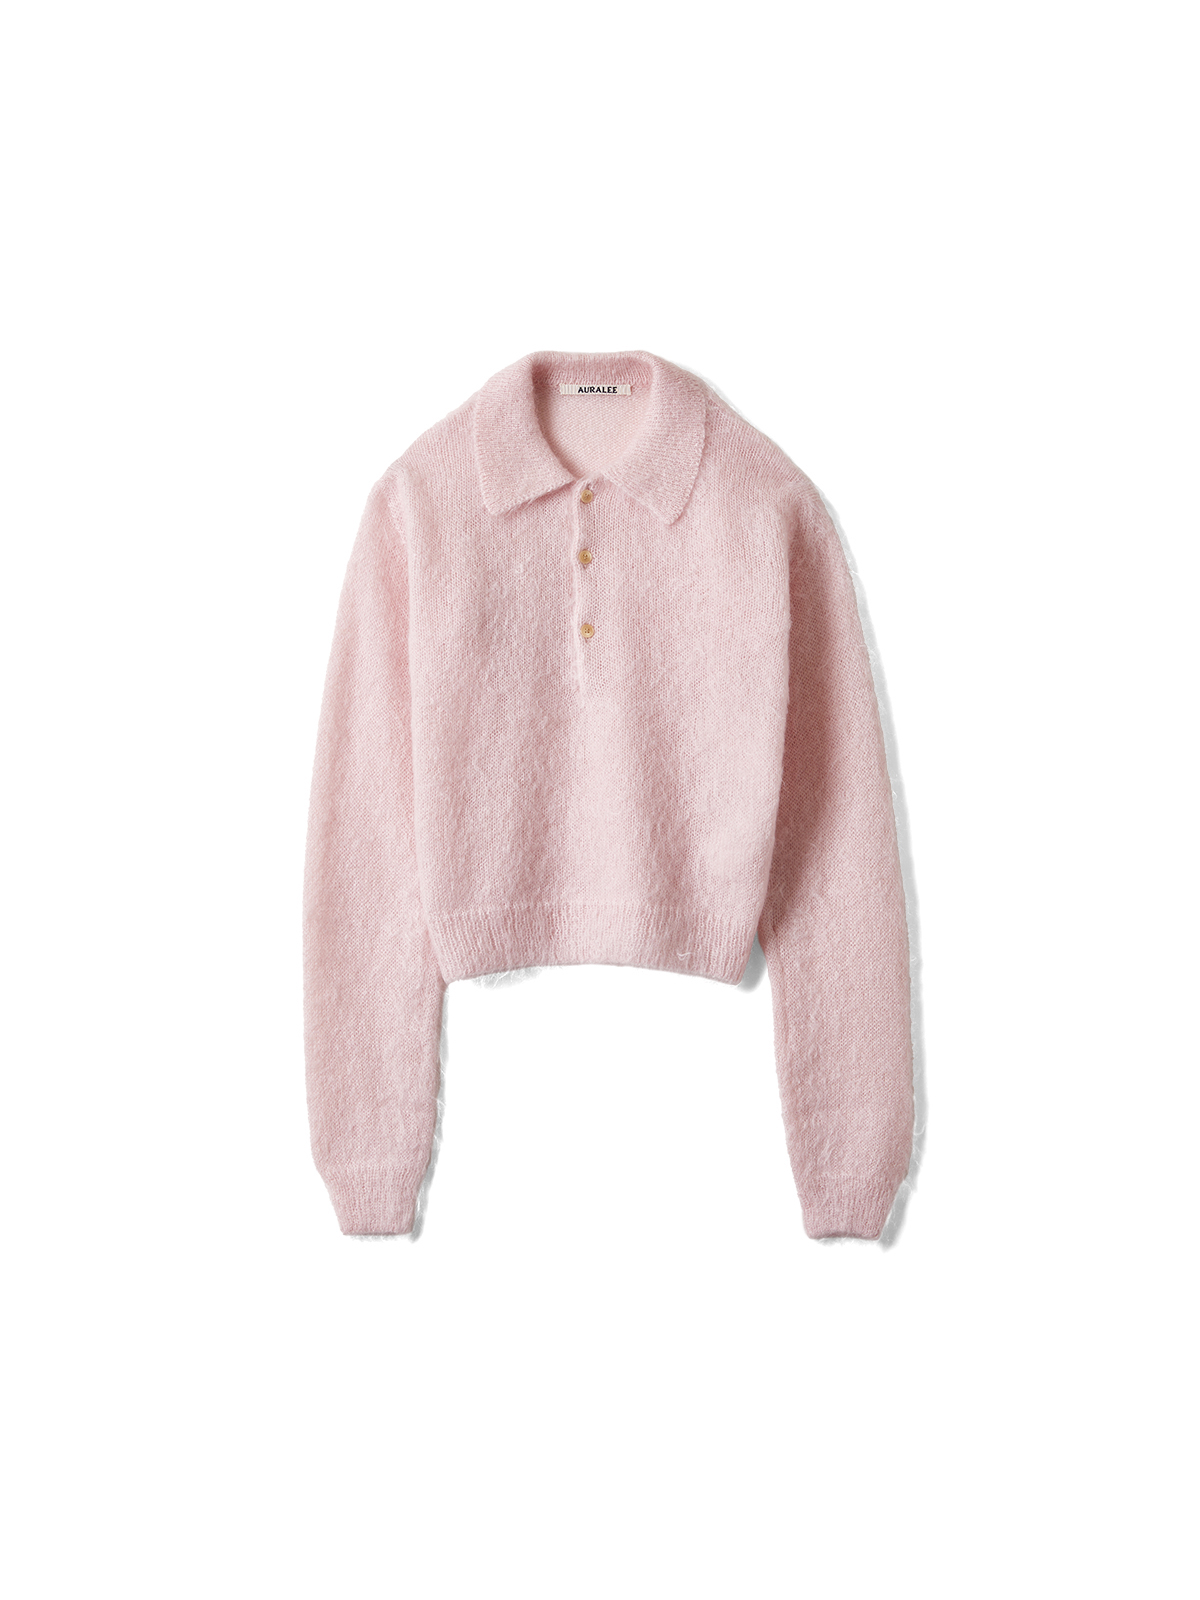 BRUSHED SUPER KID MOHAIR KNIT SHORT POLO (LIGHT PINK)